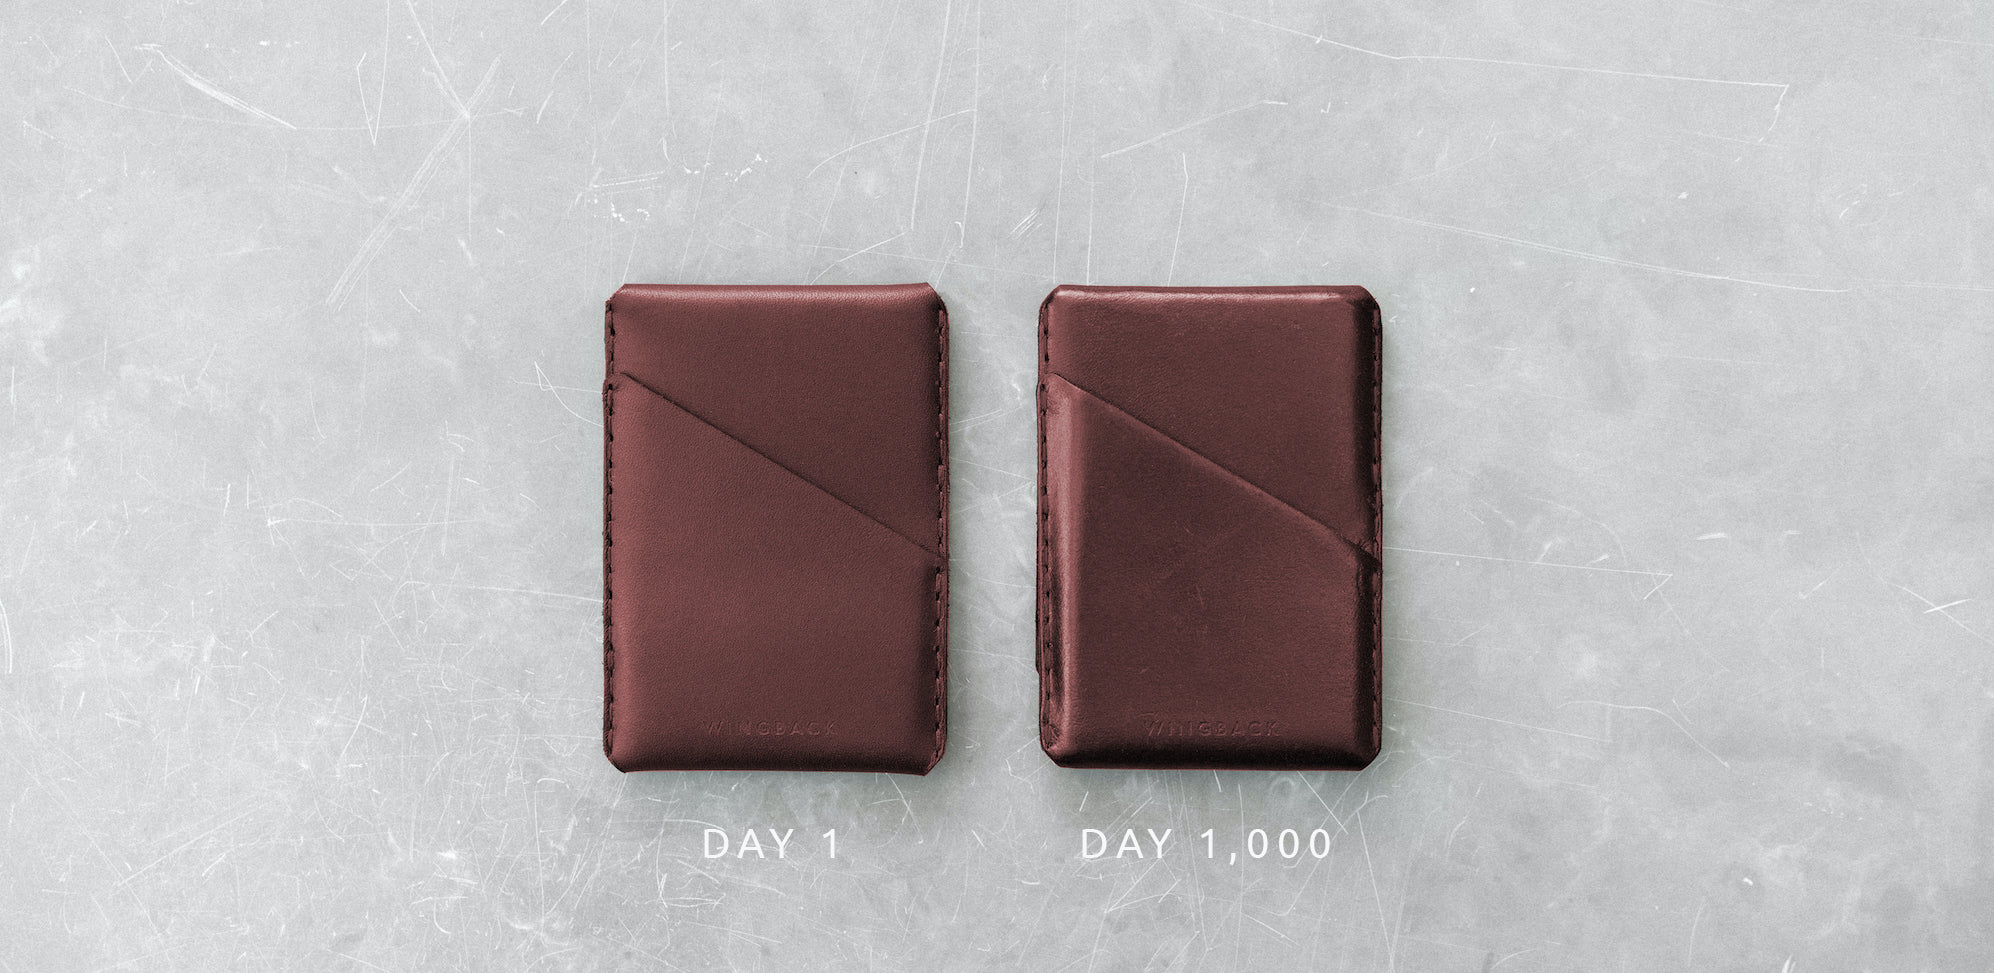 The Wingback Winston Card Holder on Day 1 and Day 1,000